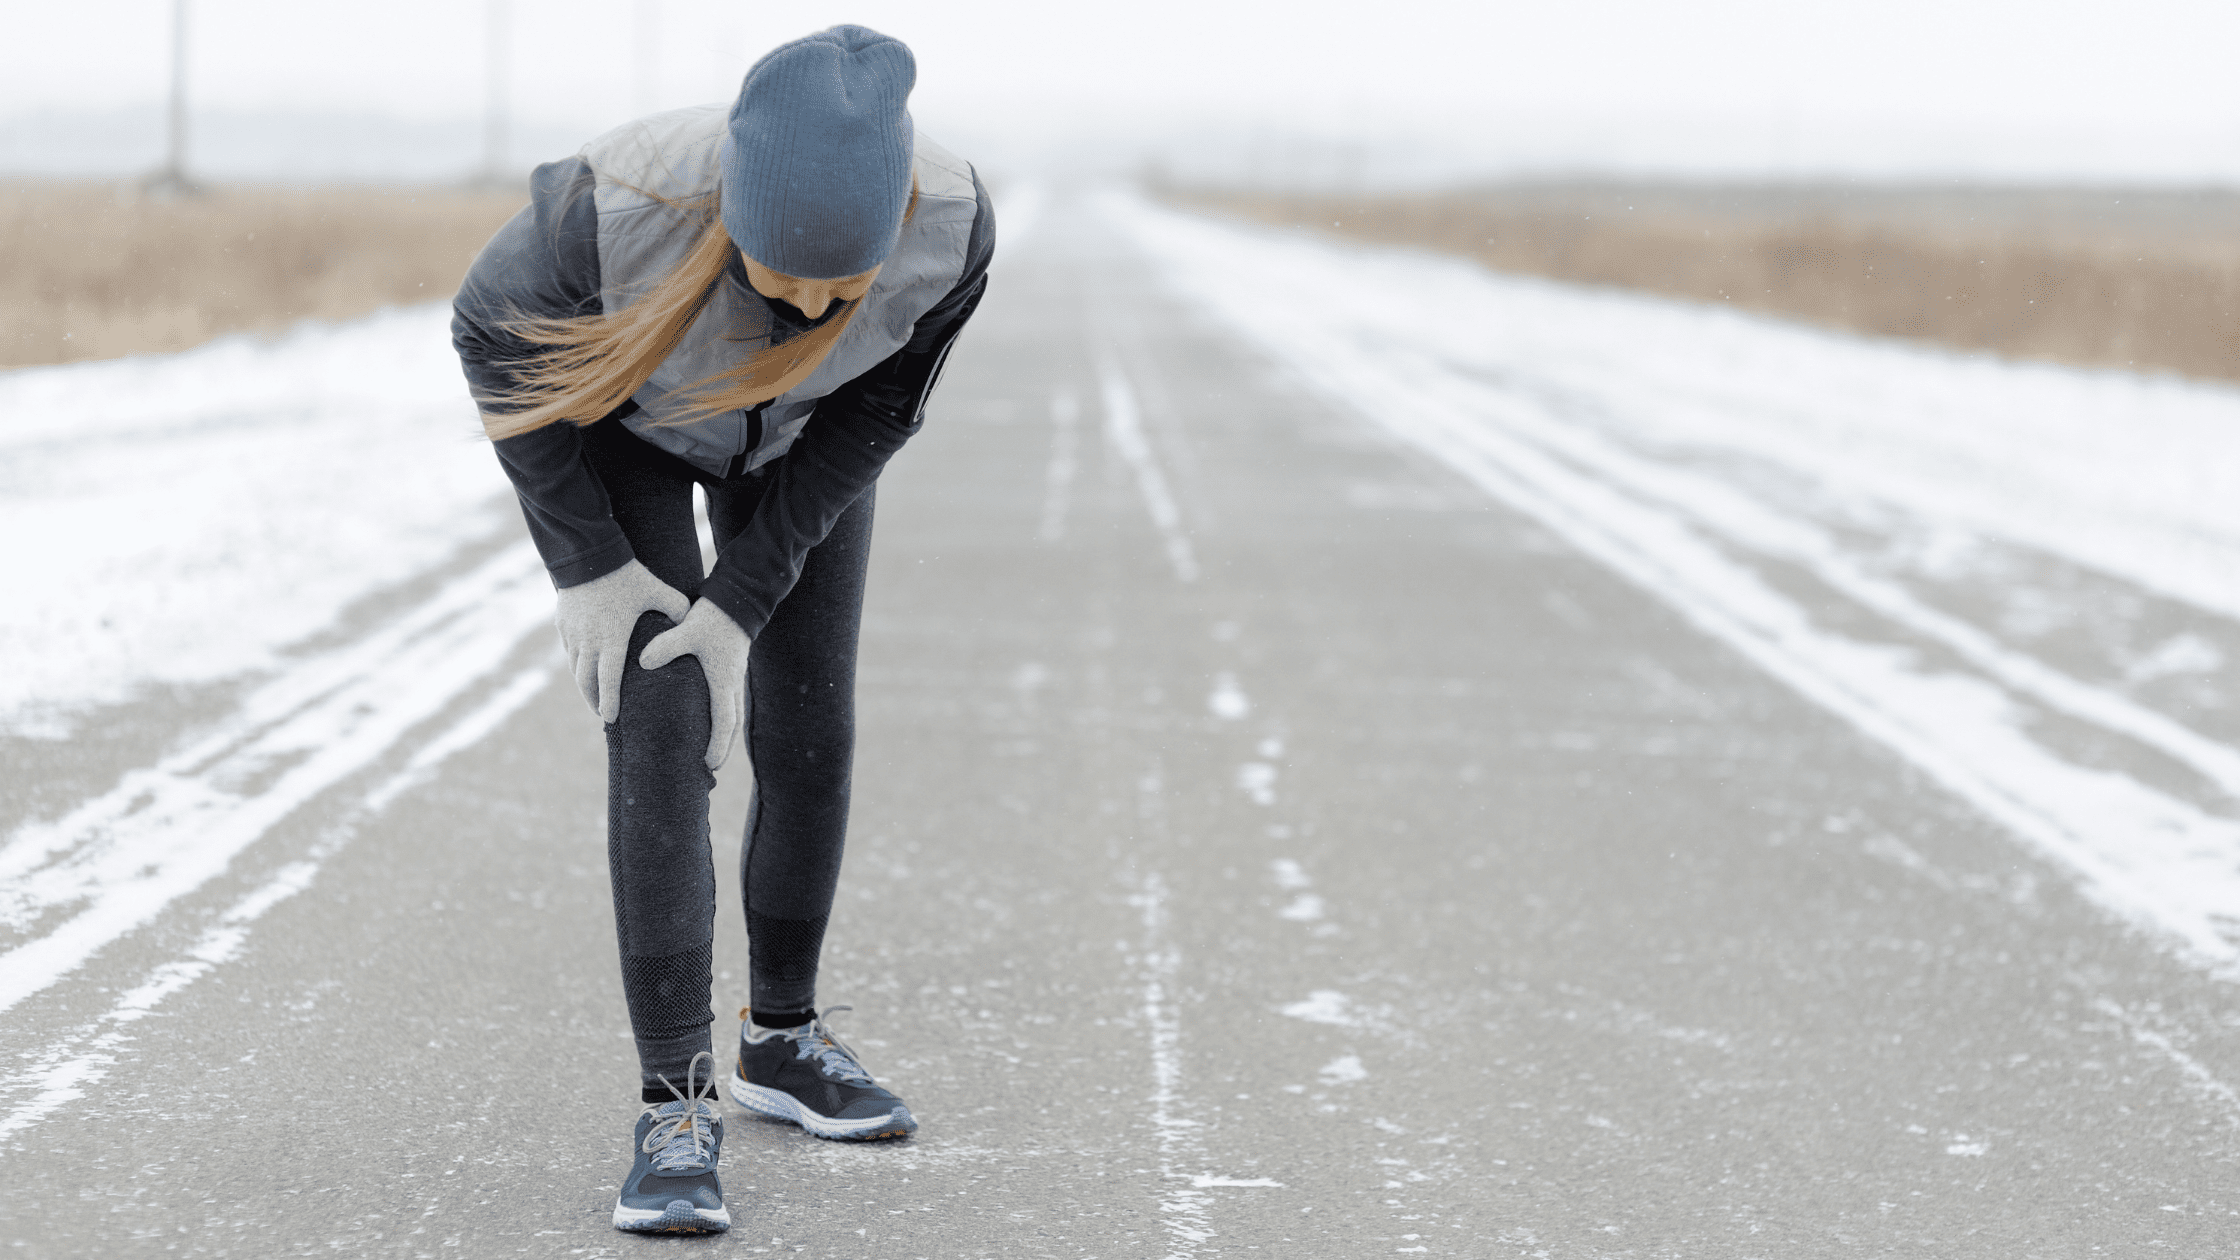 Winter Running tips: What can we do to make running in winter less  dangerous?